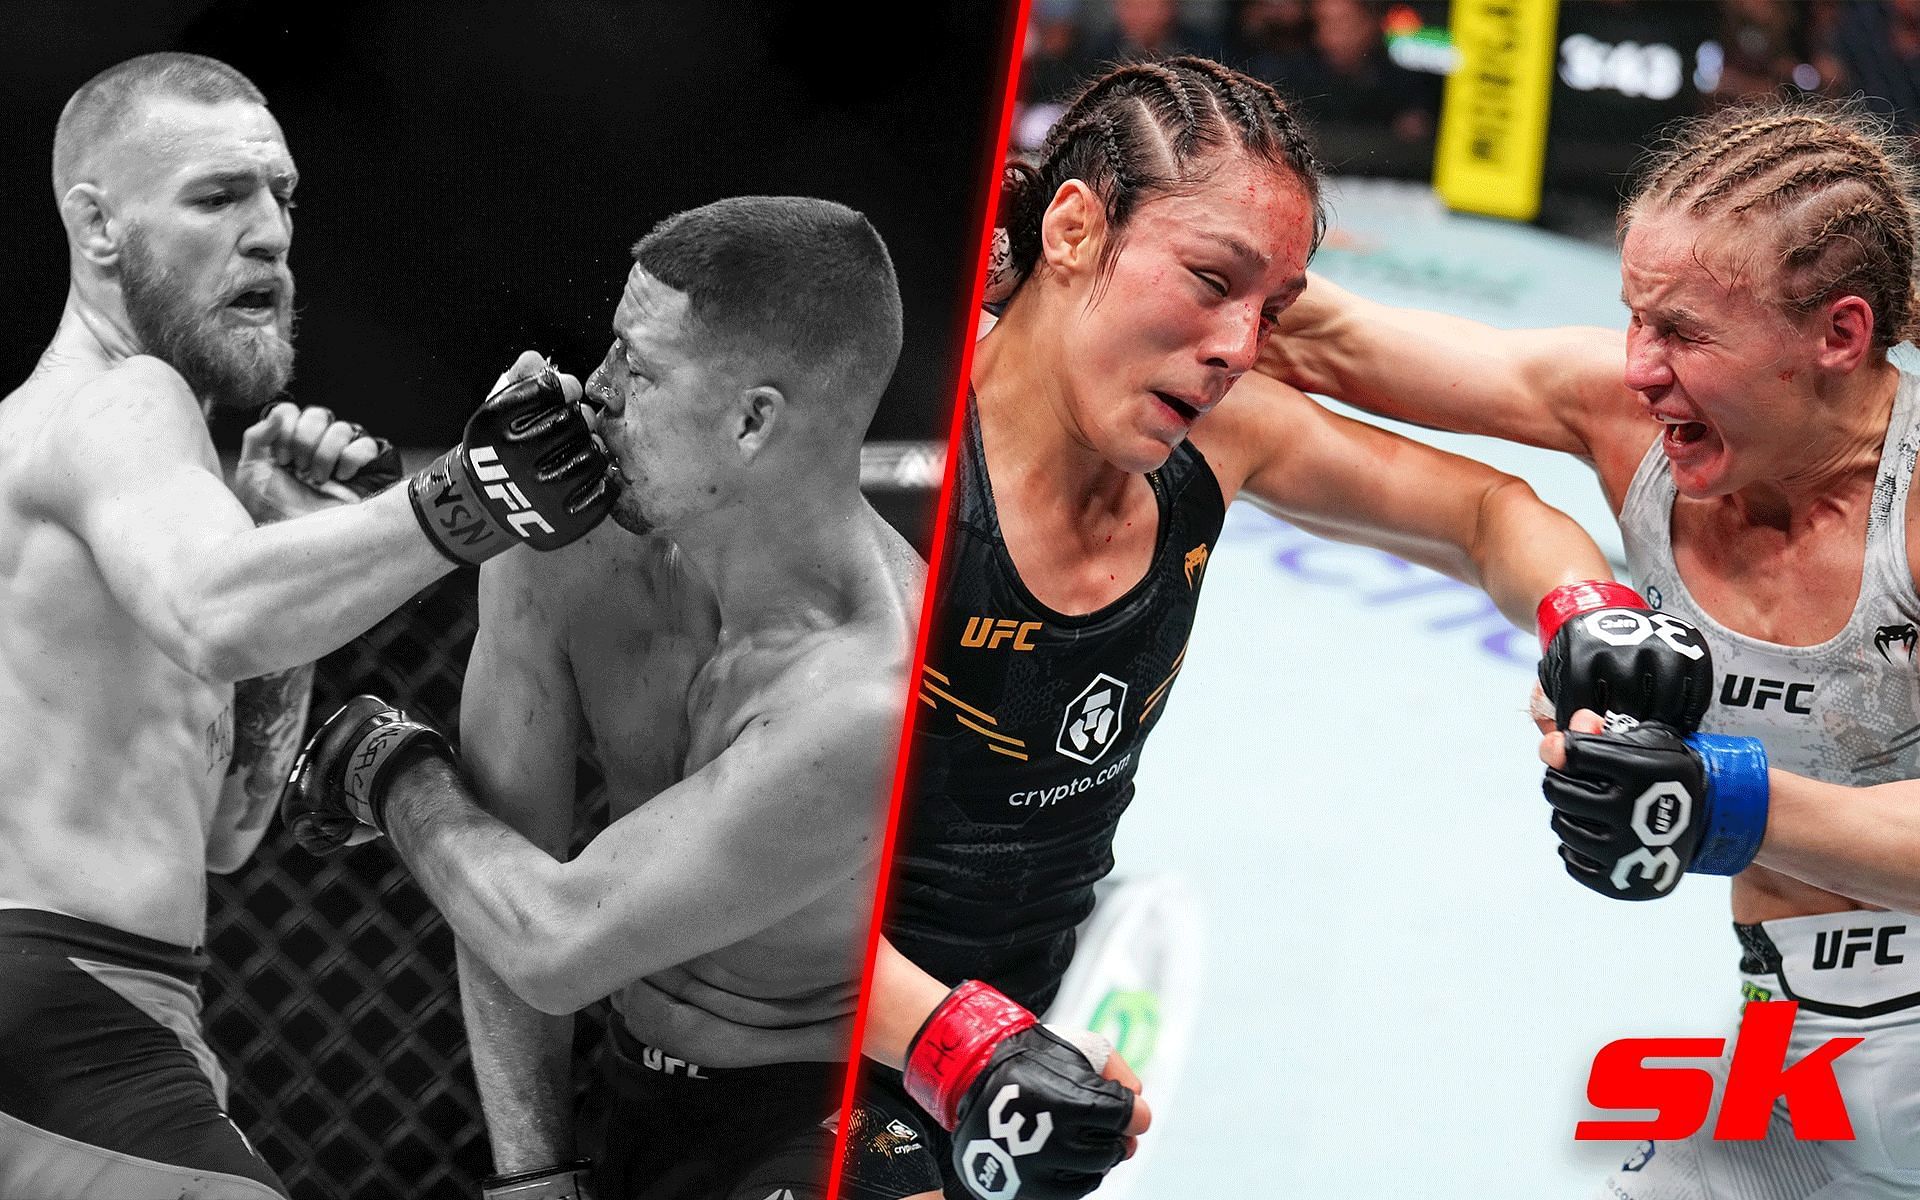 Conor McGregor vs. Nate Diaz at UFC 202 and Alexa Grasso vs. Valentina Shevchenko at Noche UFC [Image credits: Getty Images and @ufc on Twitter]